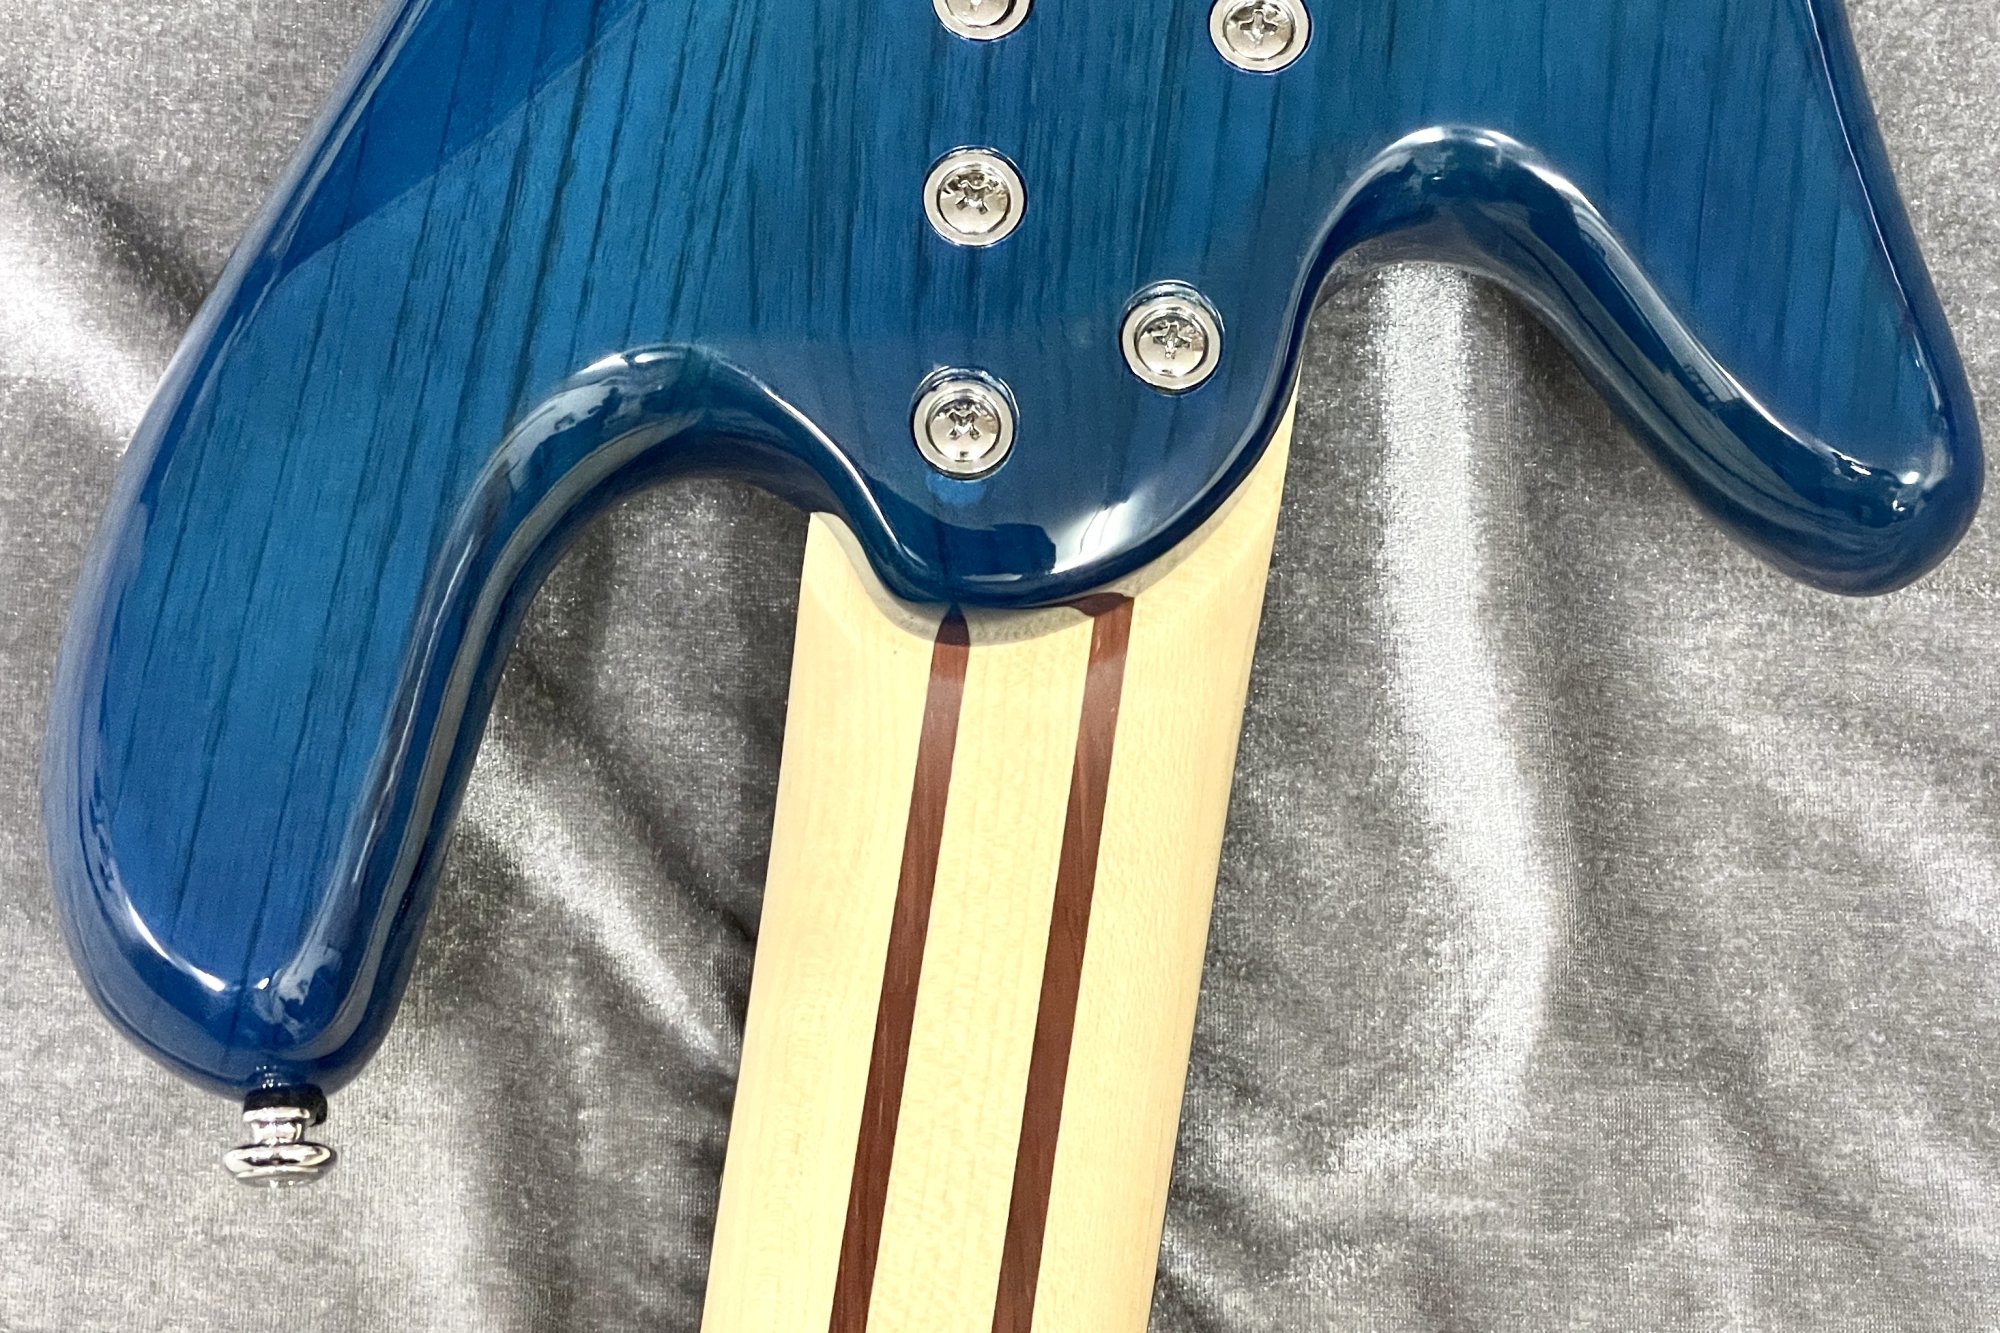 new】Spector / Legend 5 Standard Blue Stain Gloss #WI22080016 4.3